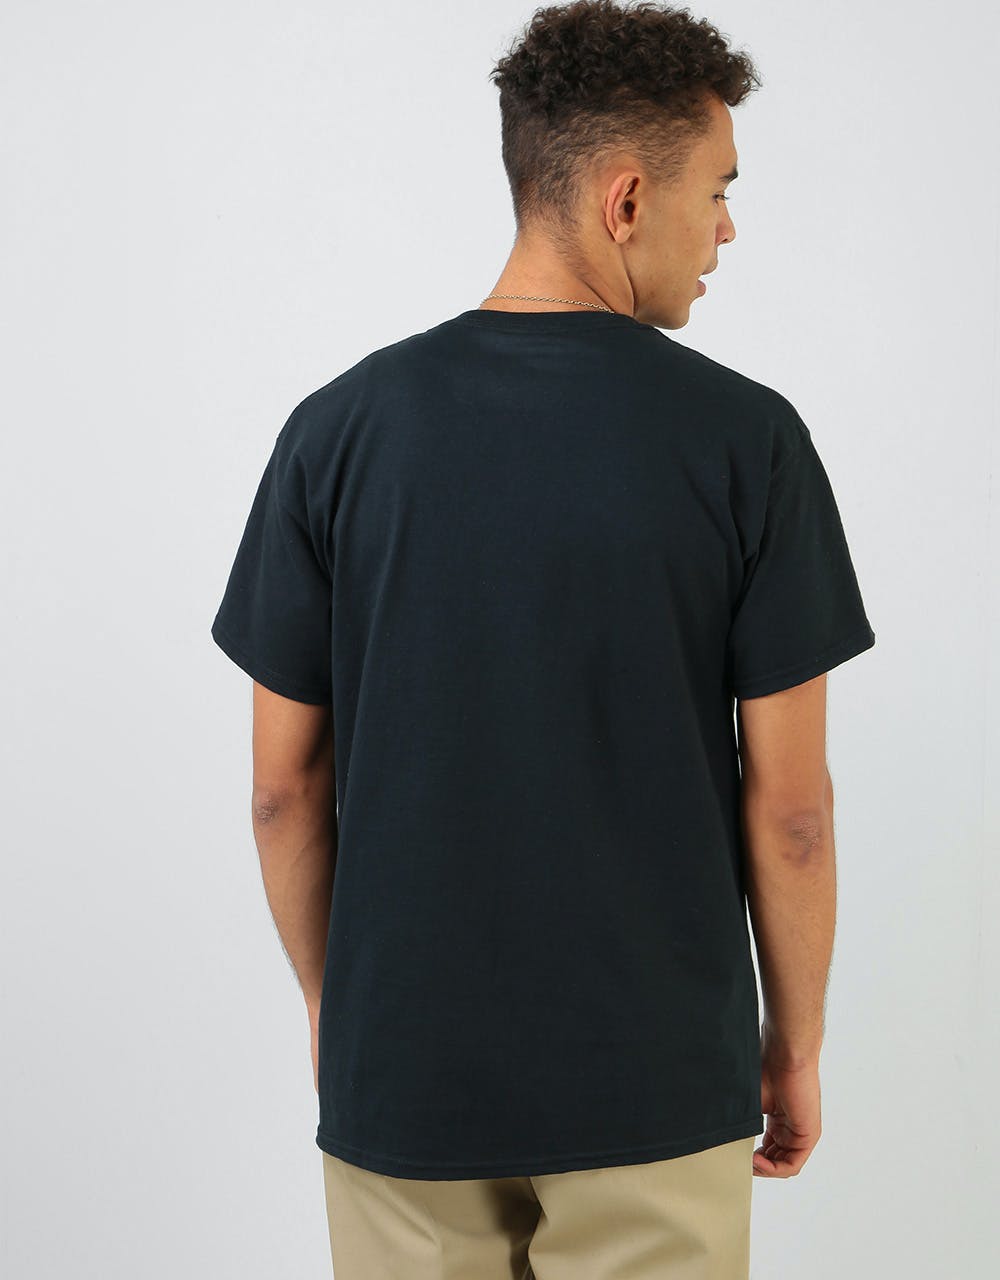 Route One Sunflower T-Shirt - Black